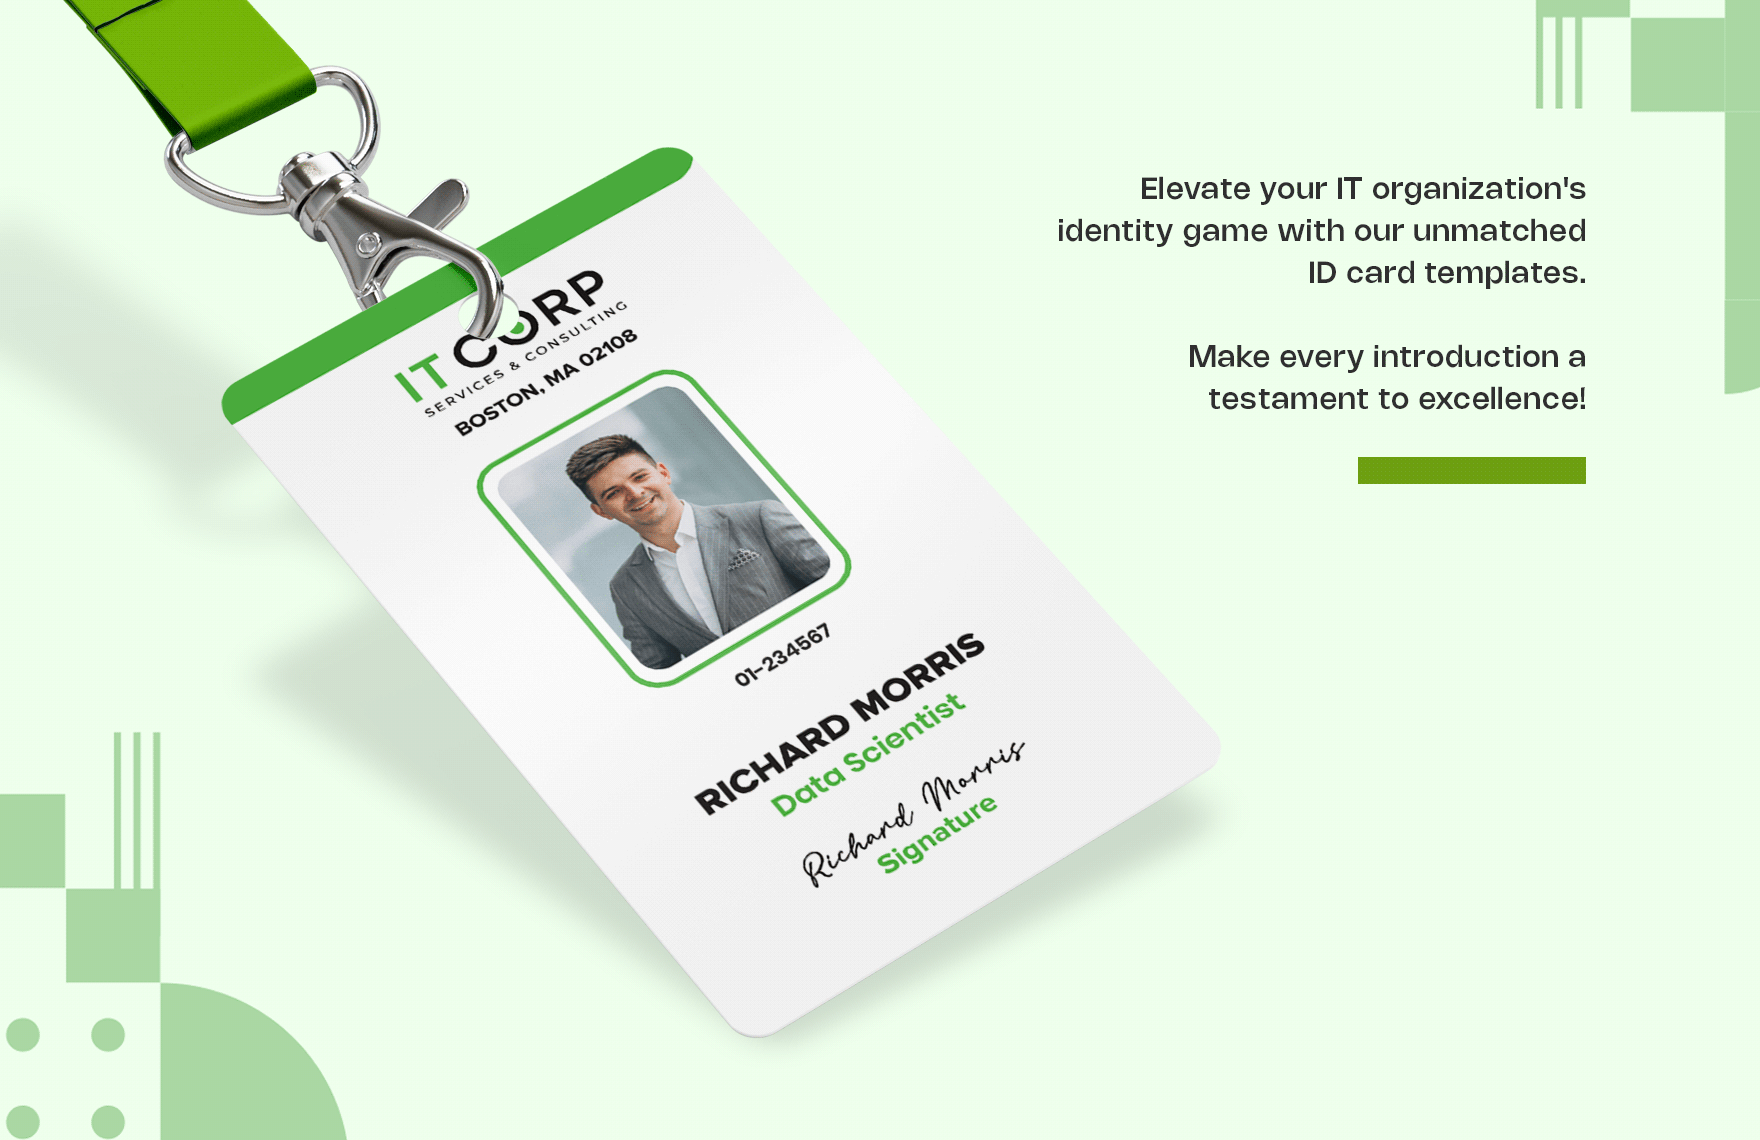 IT Business Intelligence & Analytics Consulting ID Card Template